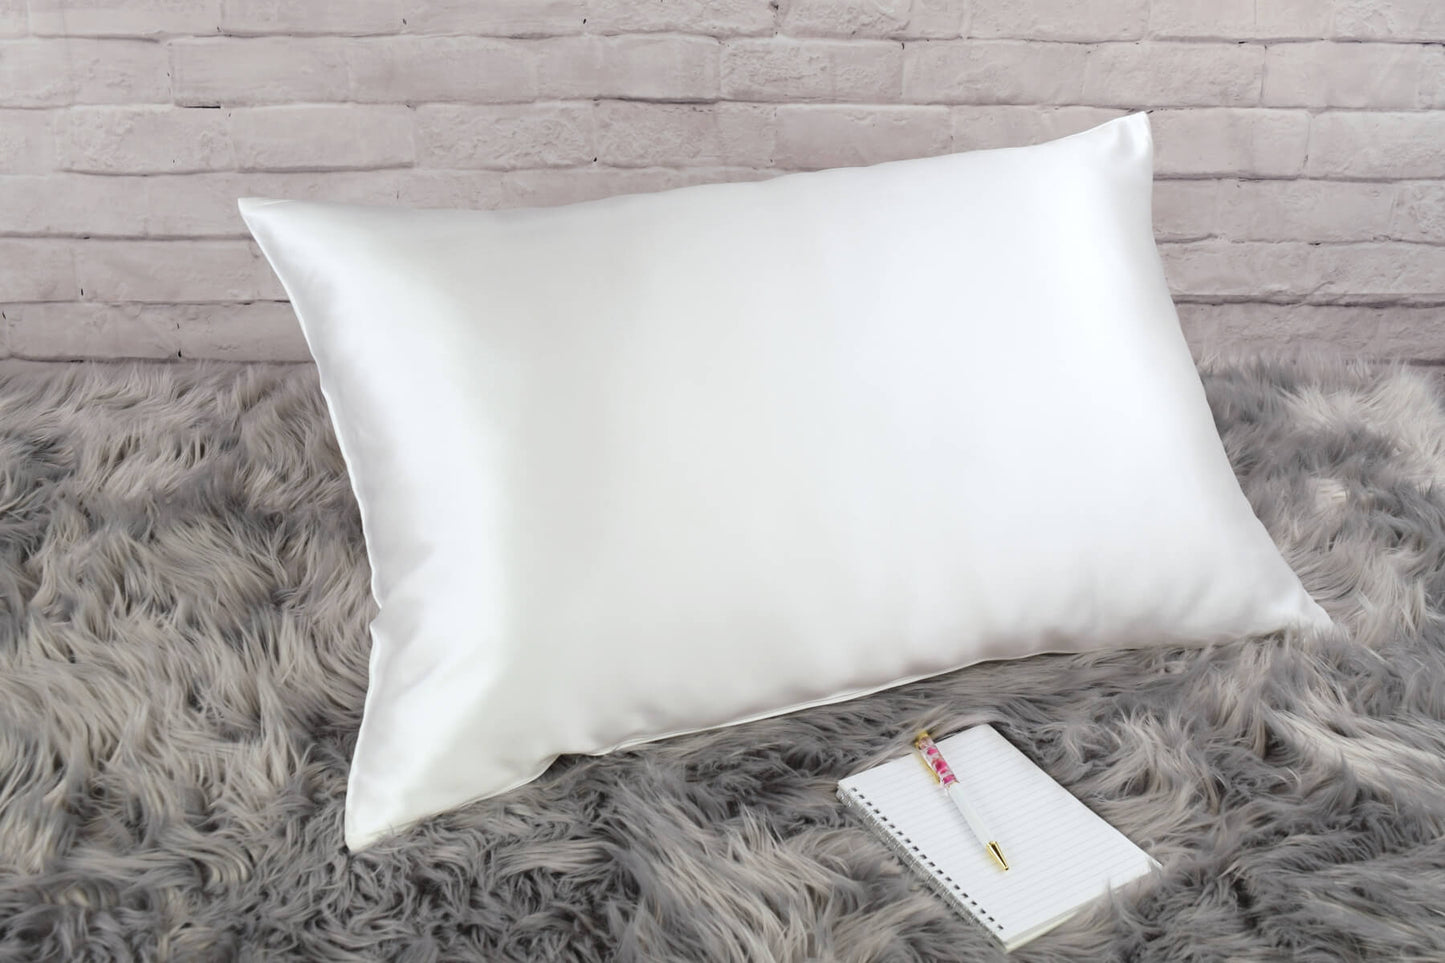 Celestial Silk Undyed ivory 25 momme Silk Pillowcase on rug with notebook and pretty pen